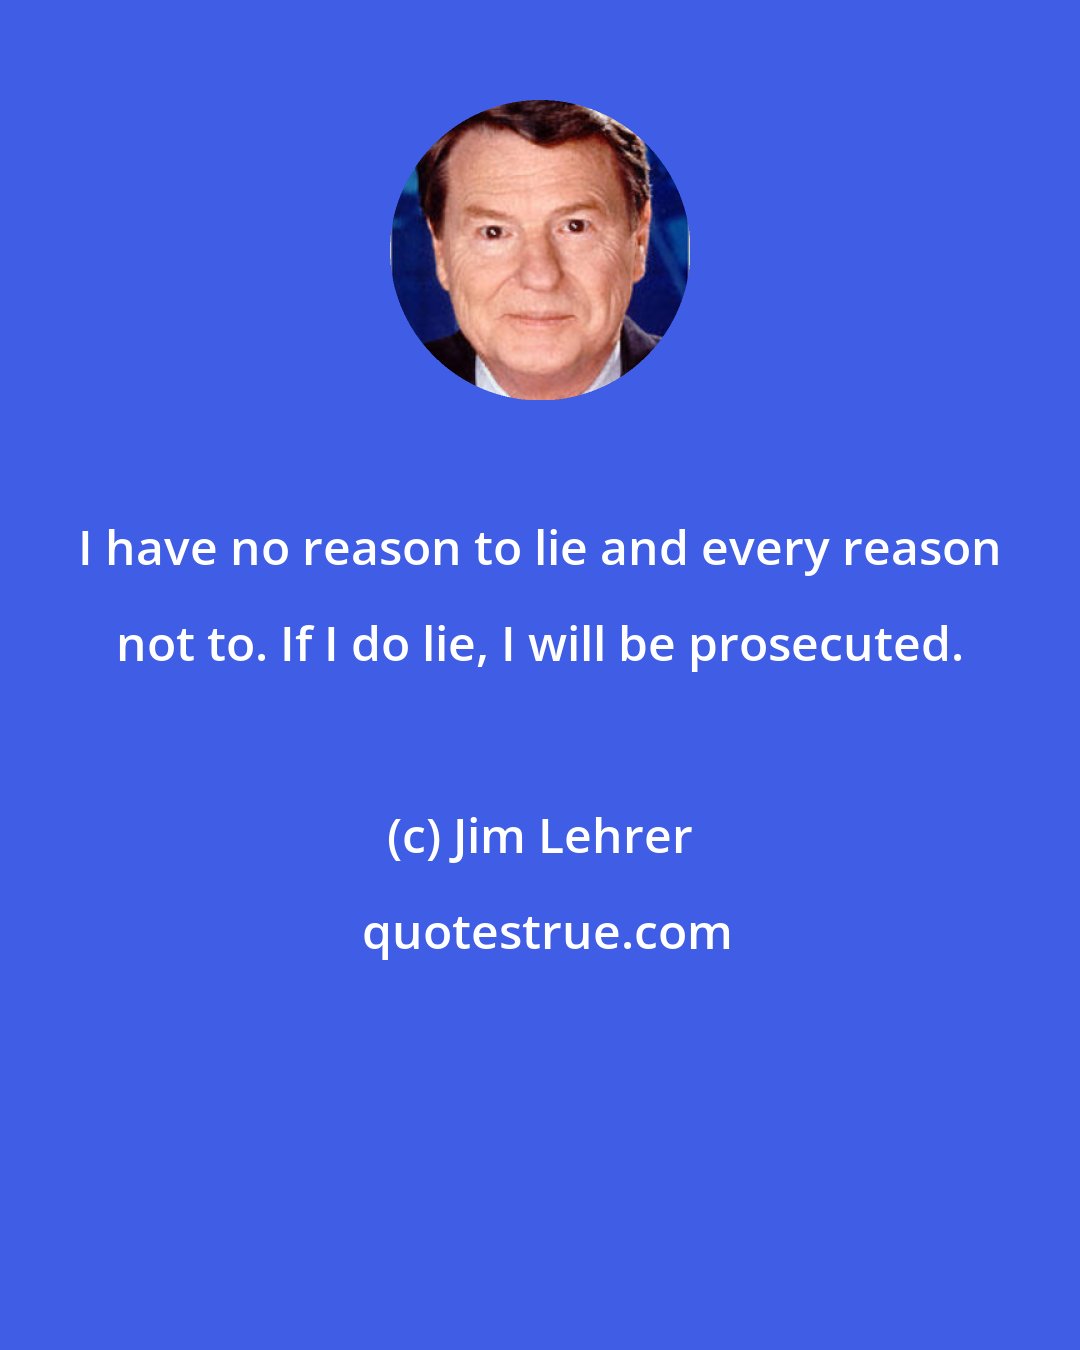 Jim Lehrer: I have no reason to lie and every reason not to. If I do lie, I will be prosecuted.